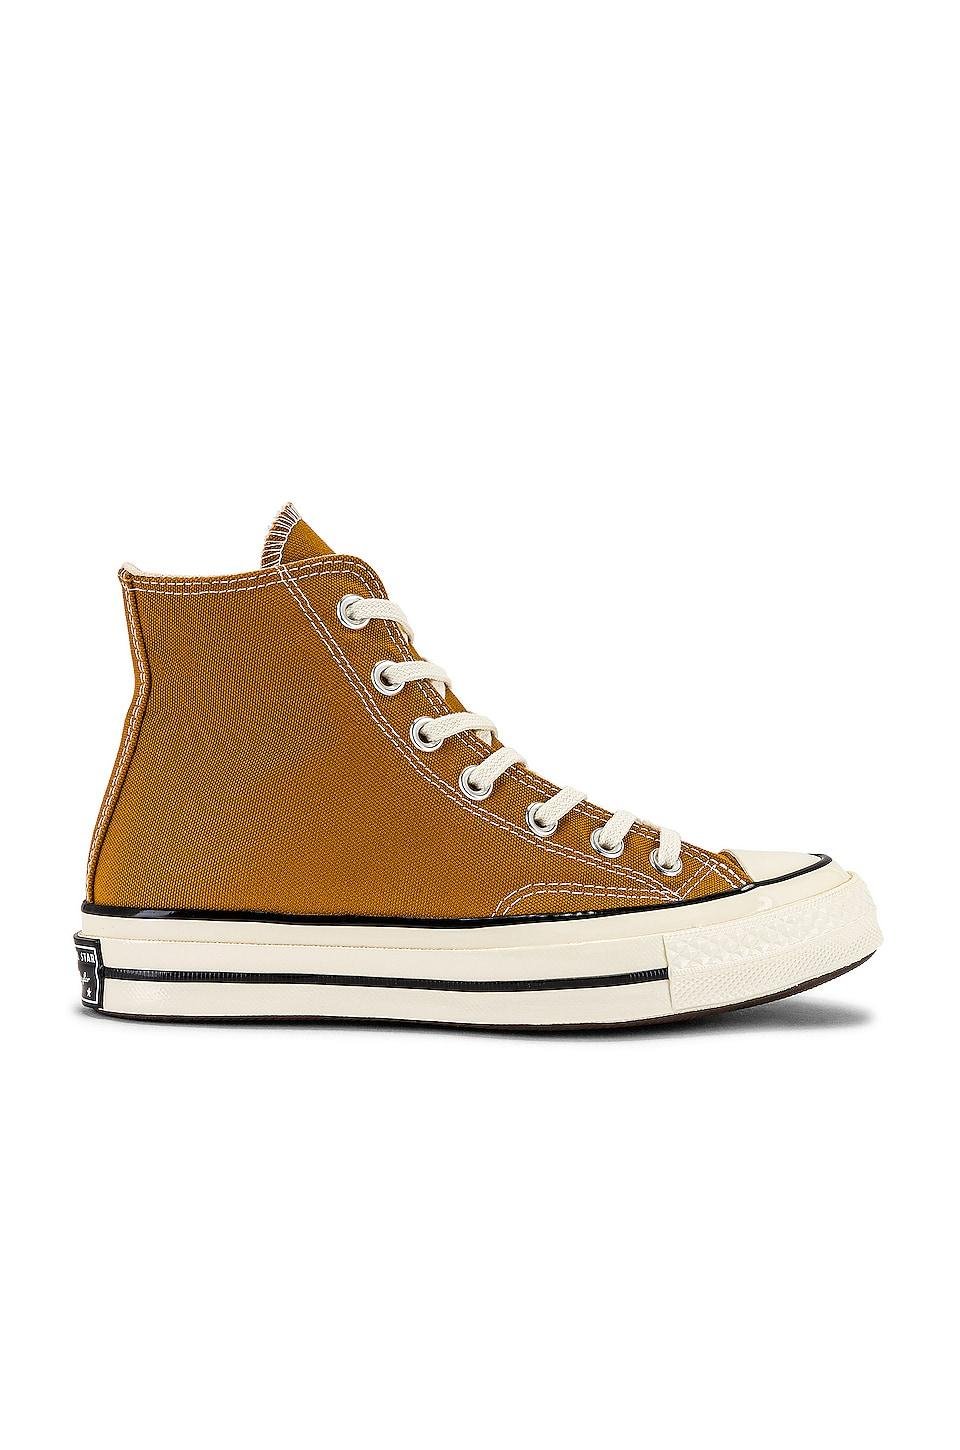 chuck 70 recycled canvas hi sneaker by CONVERSE